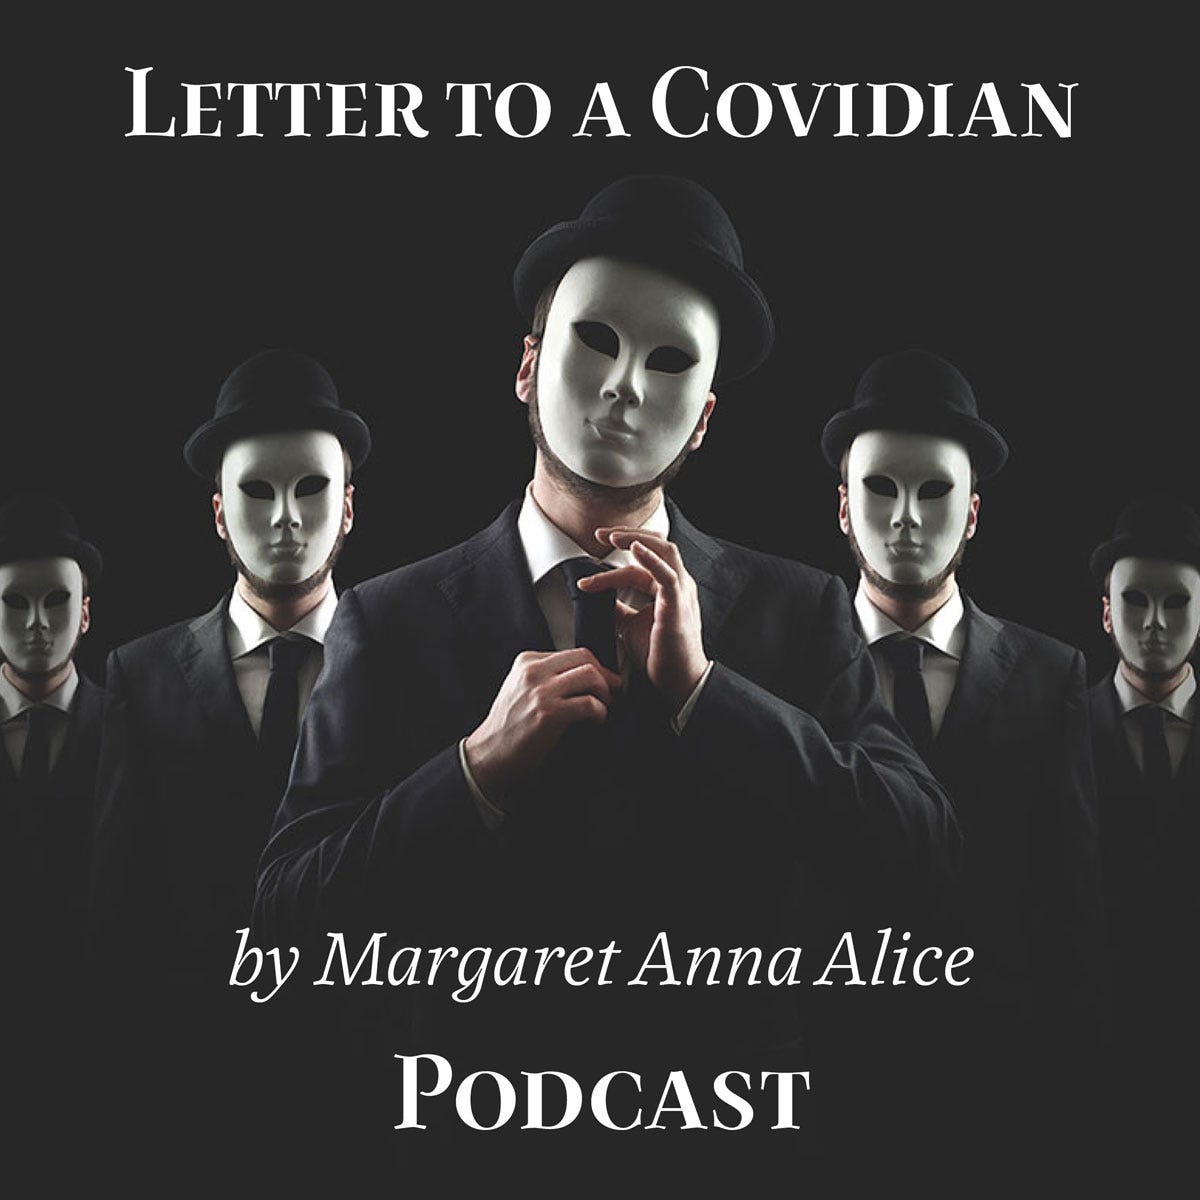 Letter to a Covidian: A Time-Travel Experiment Podcast Artwork; Creepy Masked Cult Members in Suits and Ties